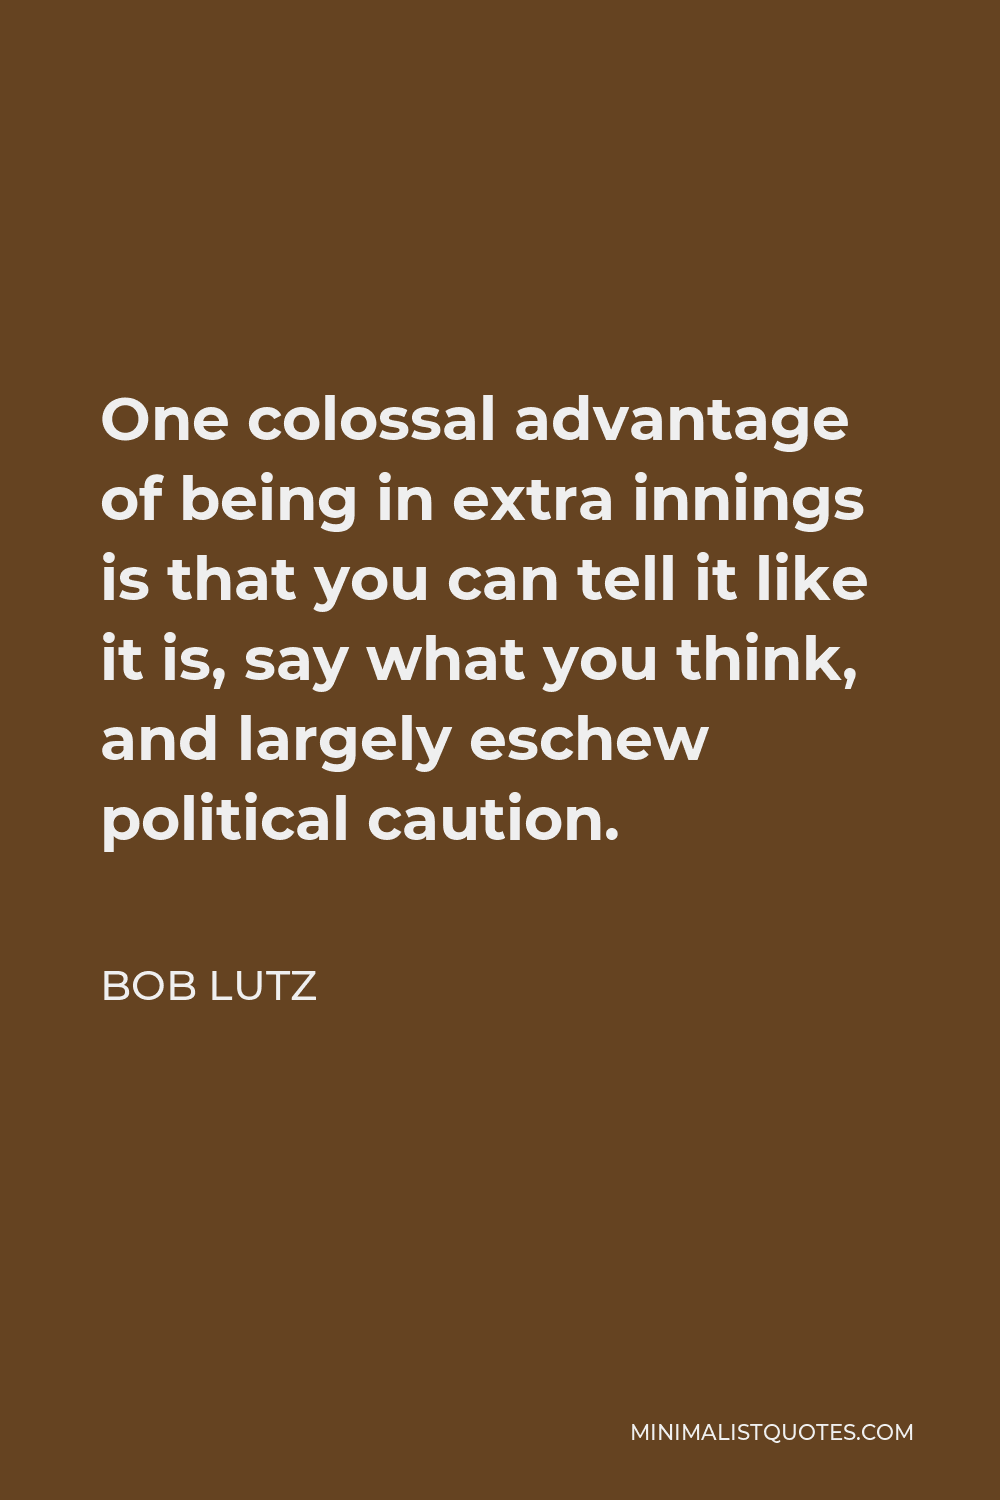 Bob Lutz Quote - One colossal advantage of being in extra innings is that you can tell it like it is, say what you think, and largely eschew political caution.